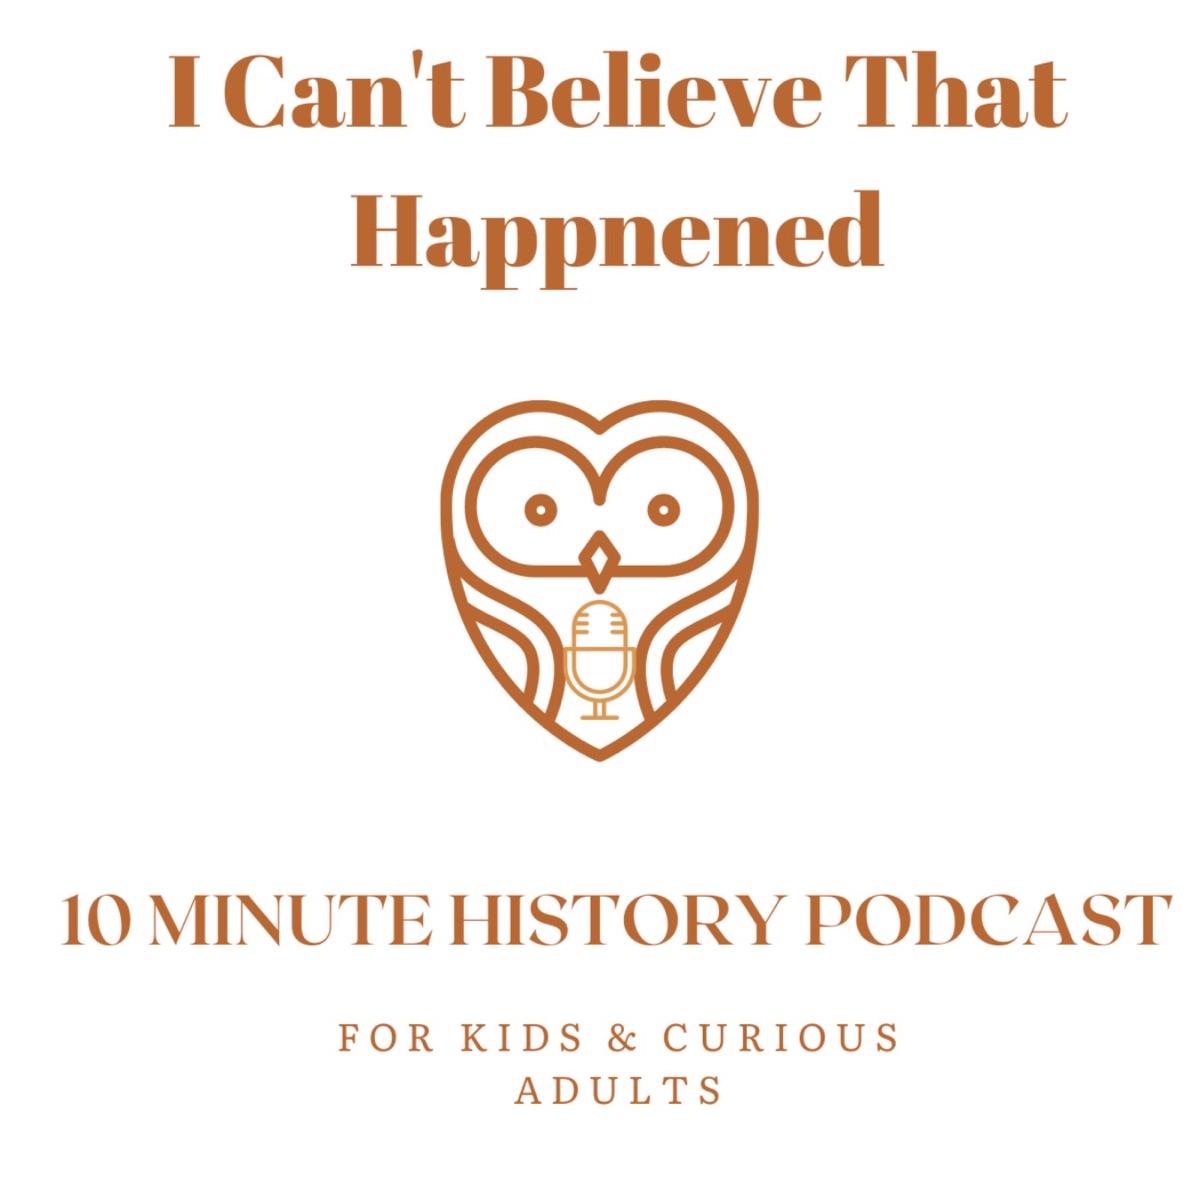 I Cant Believe That Happened History Podcast for Kids – Podcast image